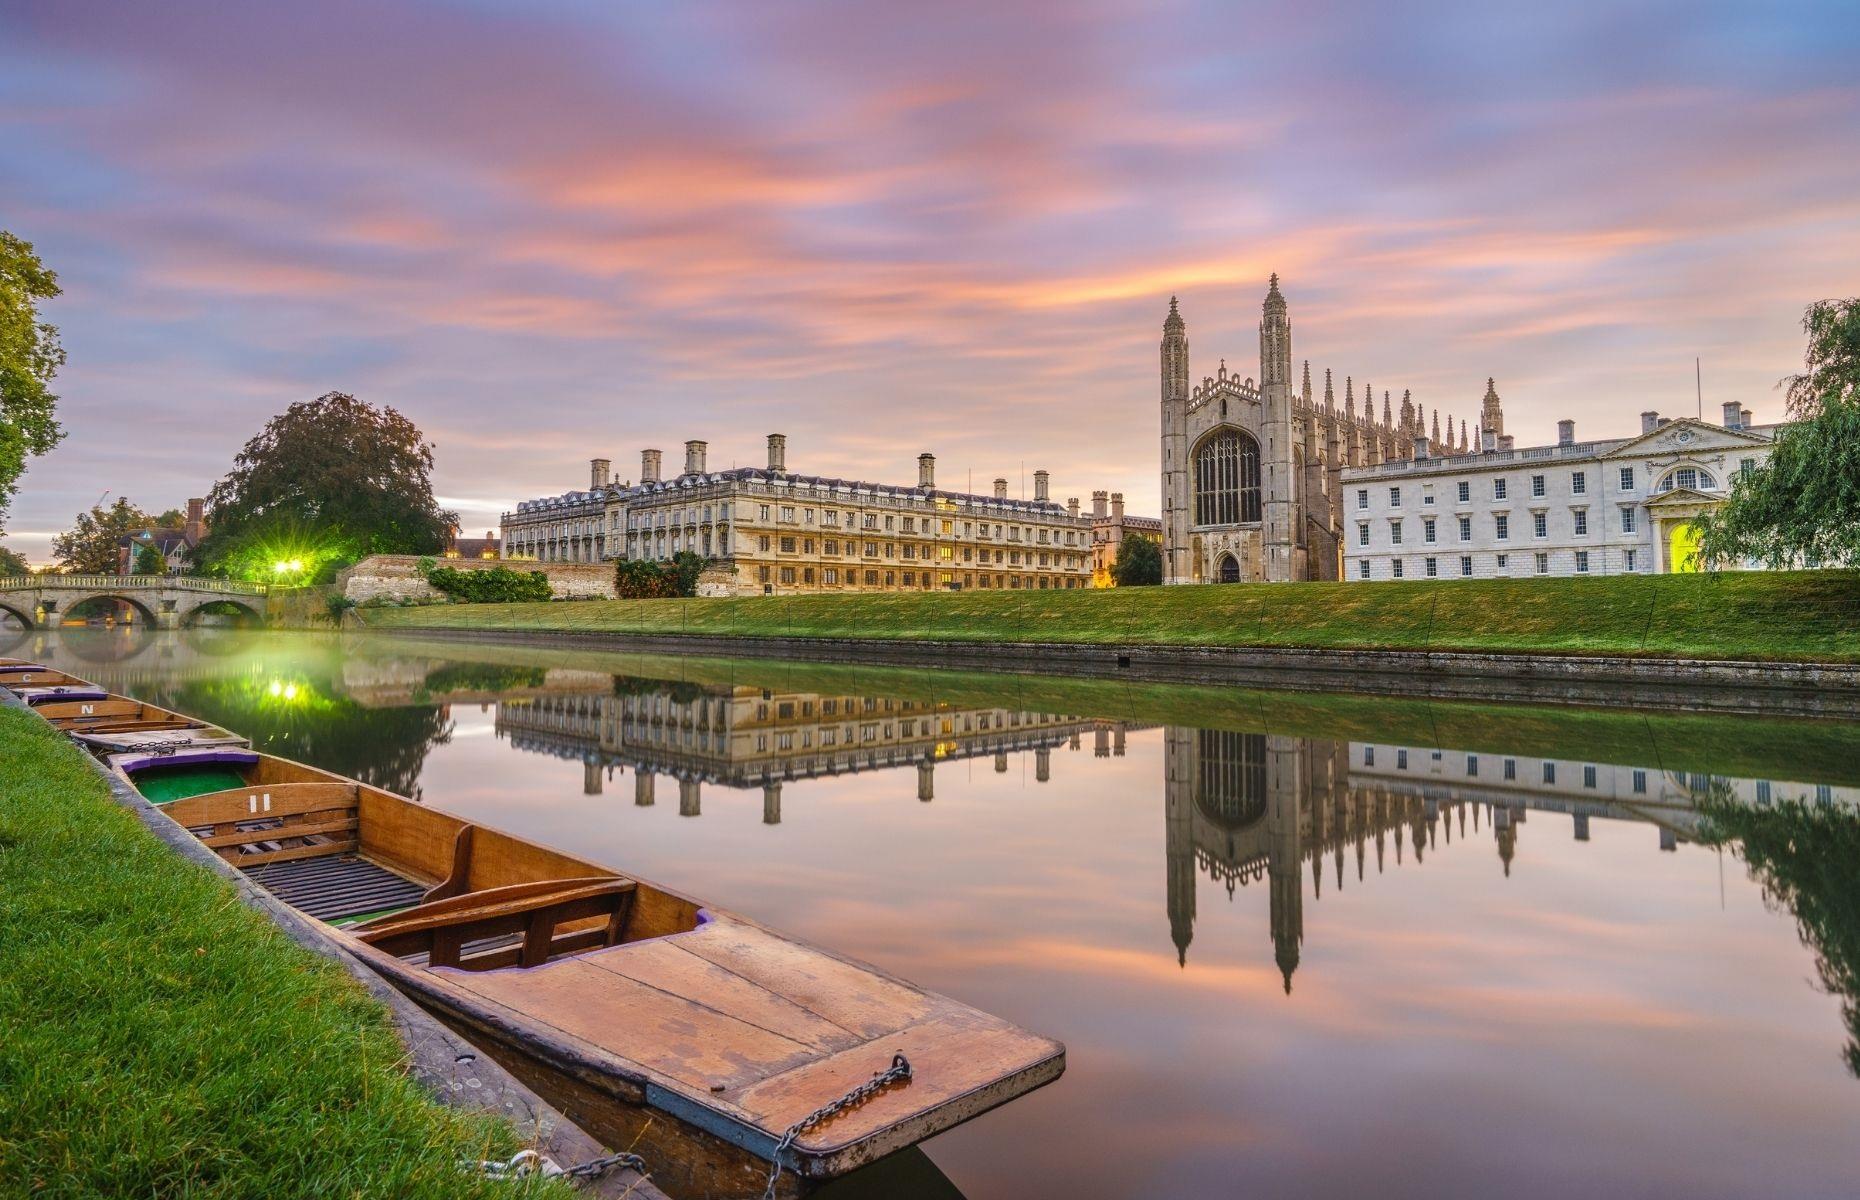 <p>The University of Cambridge was founded in 1209, making it one of the oldest surviving universities in the world. The institution is made up of 31 colleges and six schools and its architecture is otherworldly. Highlights include the chapel at King's College and the Bridge of Sighs at St John's College. It's usually <a href="https://www.cam.ac.uk/about-the-university/visiting-the-university">open for visitors</a>, so you can walk in the footsteps of former students like Sir David Attenborough.</p>